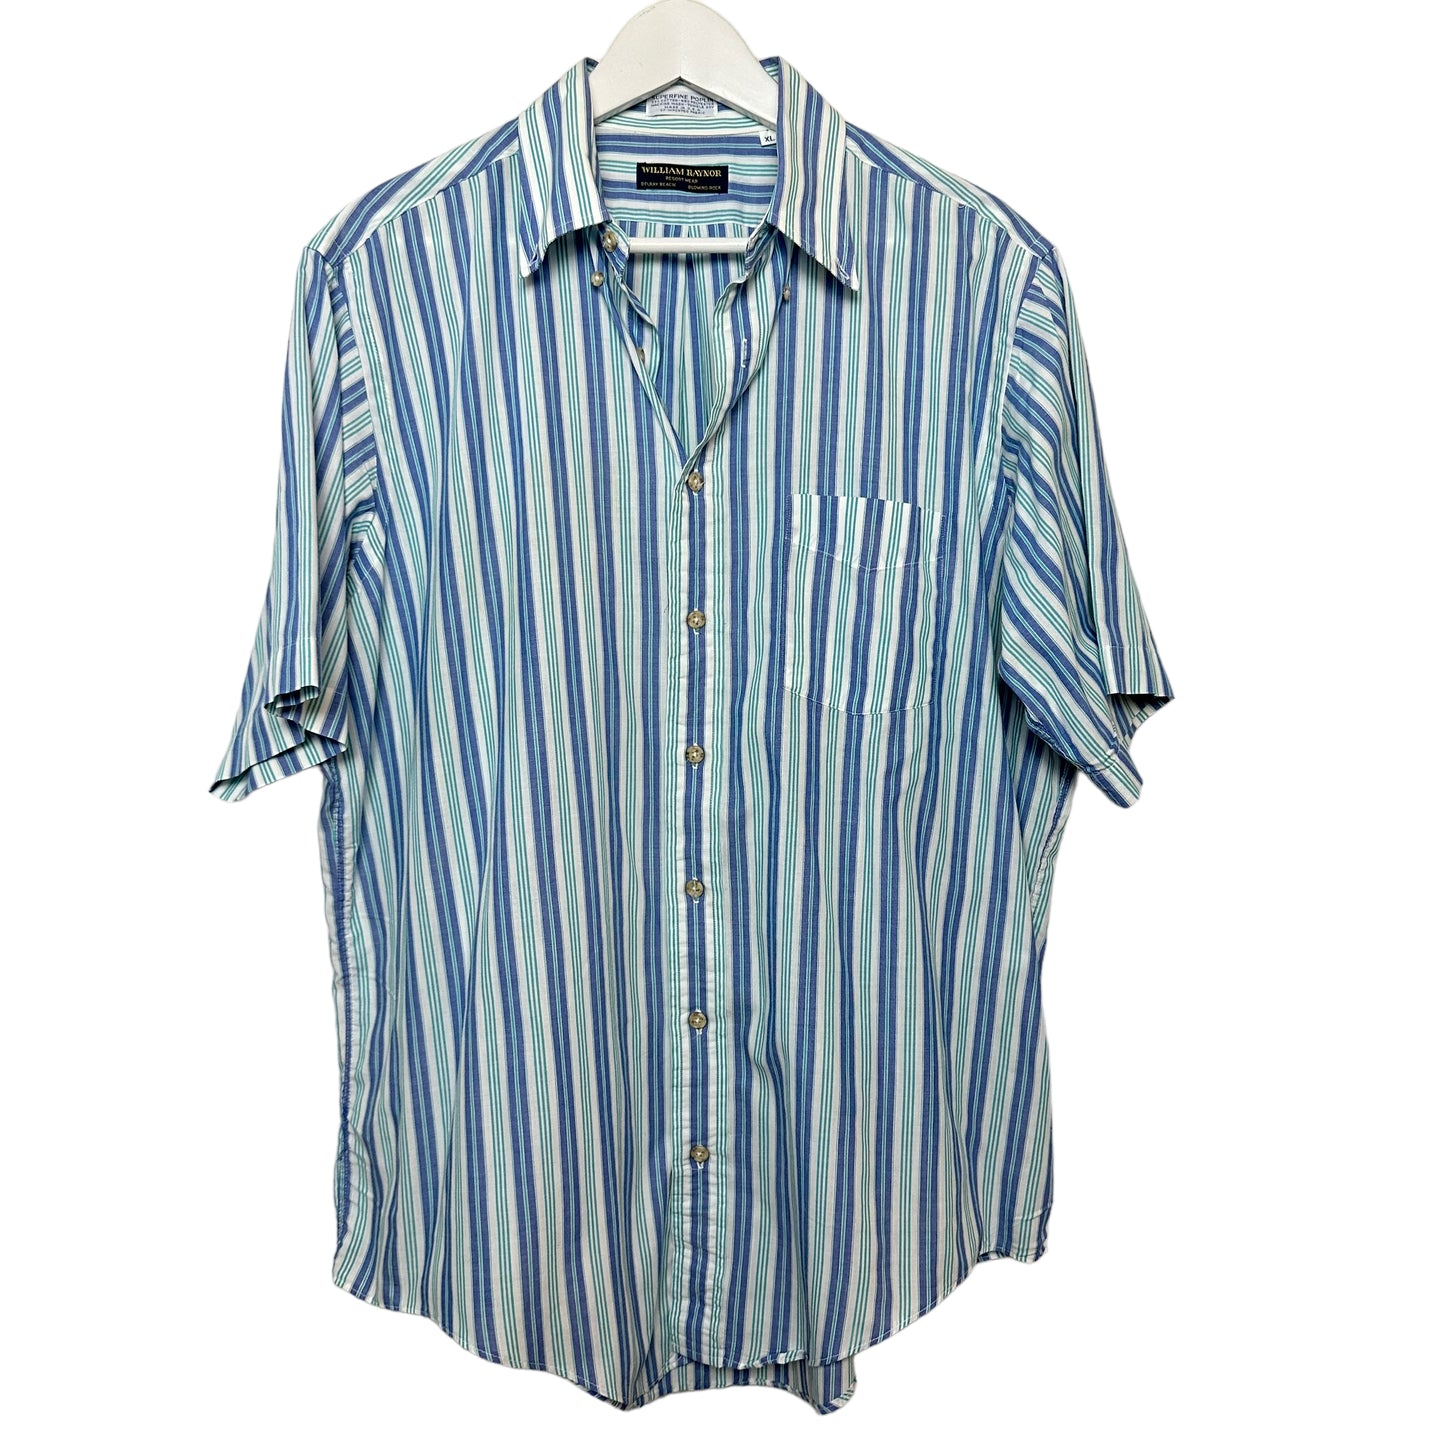 Vintage 90s William Raynor Striped Short Sleeve Button Down Blue Made in the USA XL